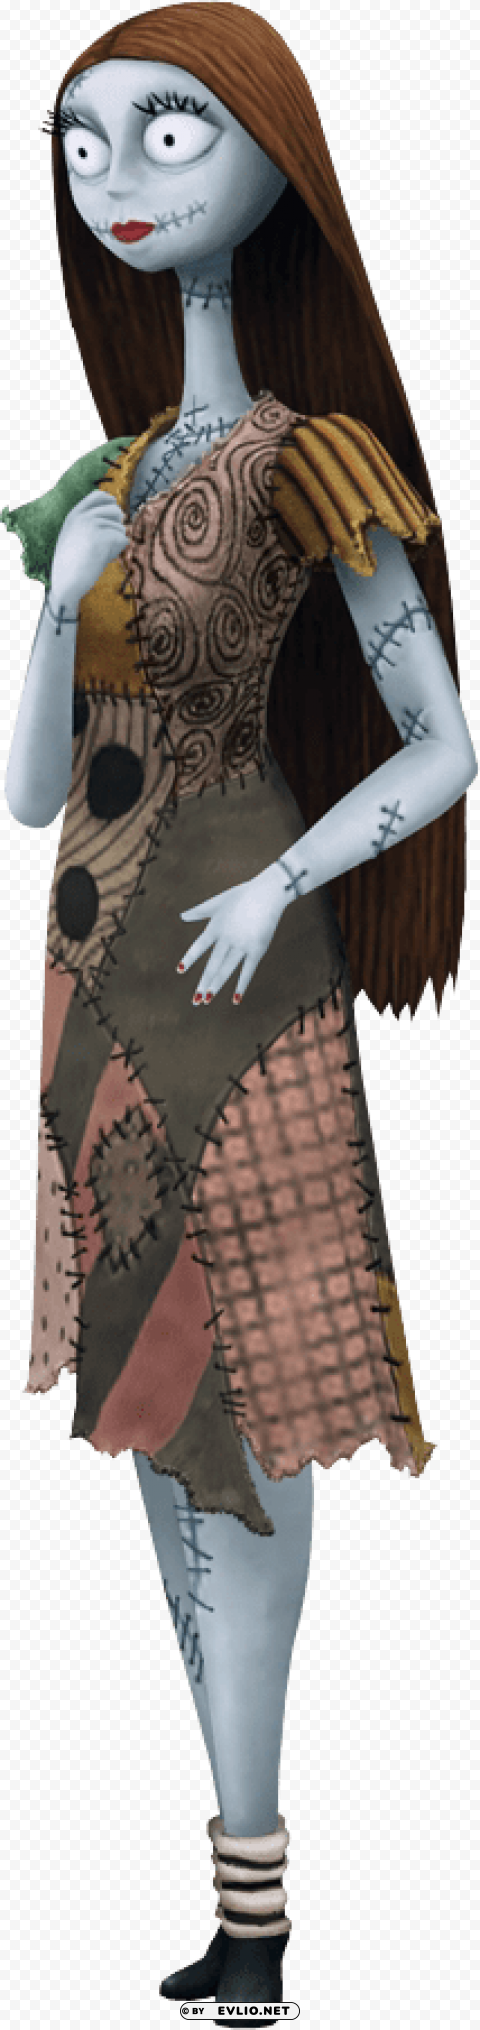 sally khii - sally nightmare before christmas inspired dress PNG transparent photos massive collection